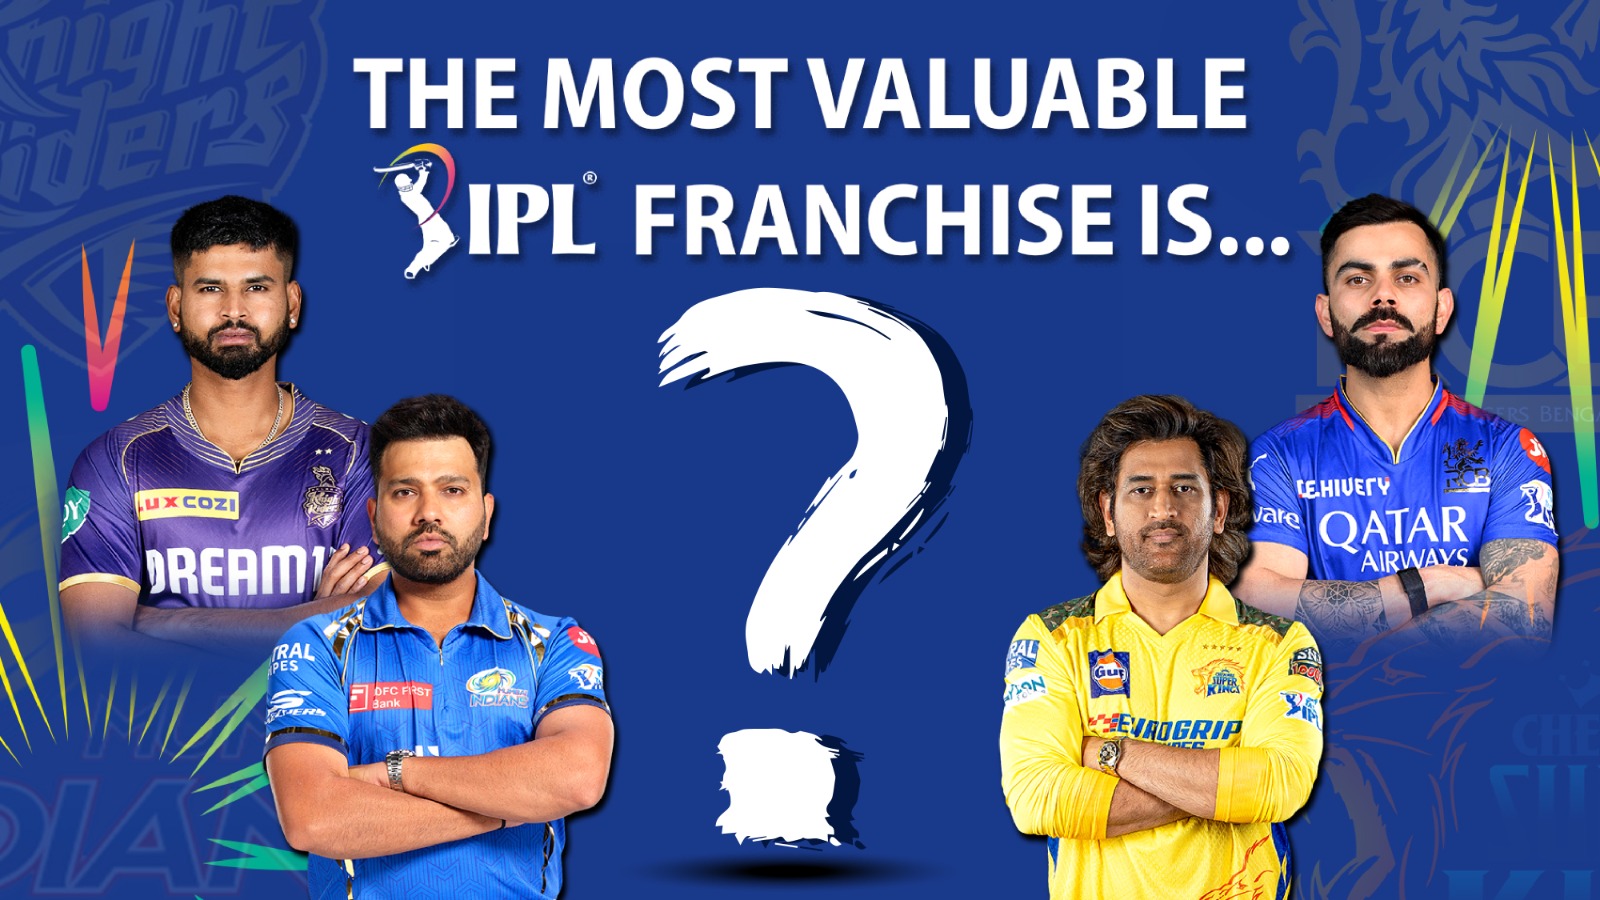 And The Most Valuable IPL Franchise Is…